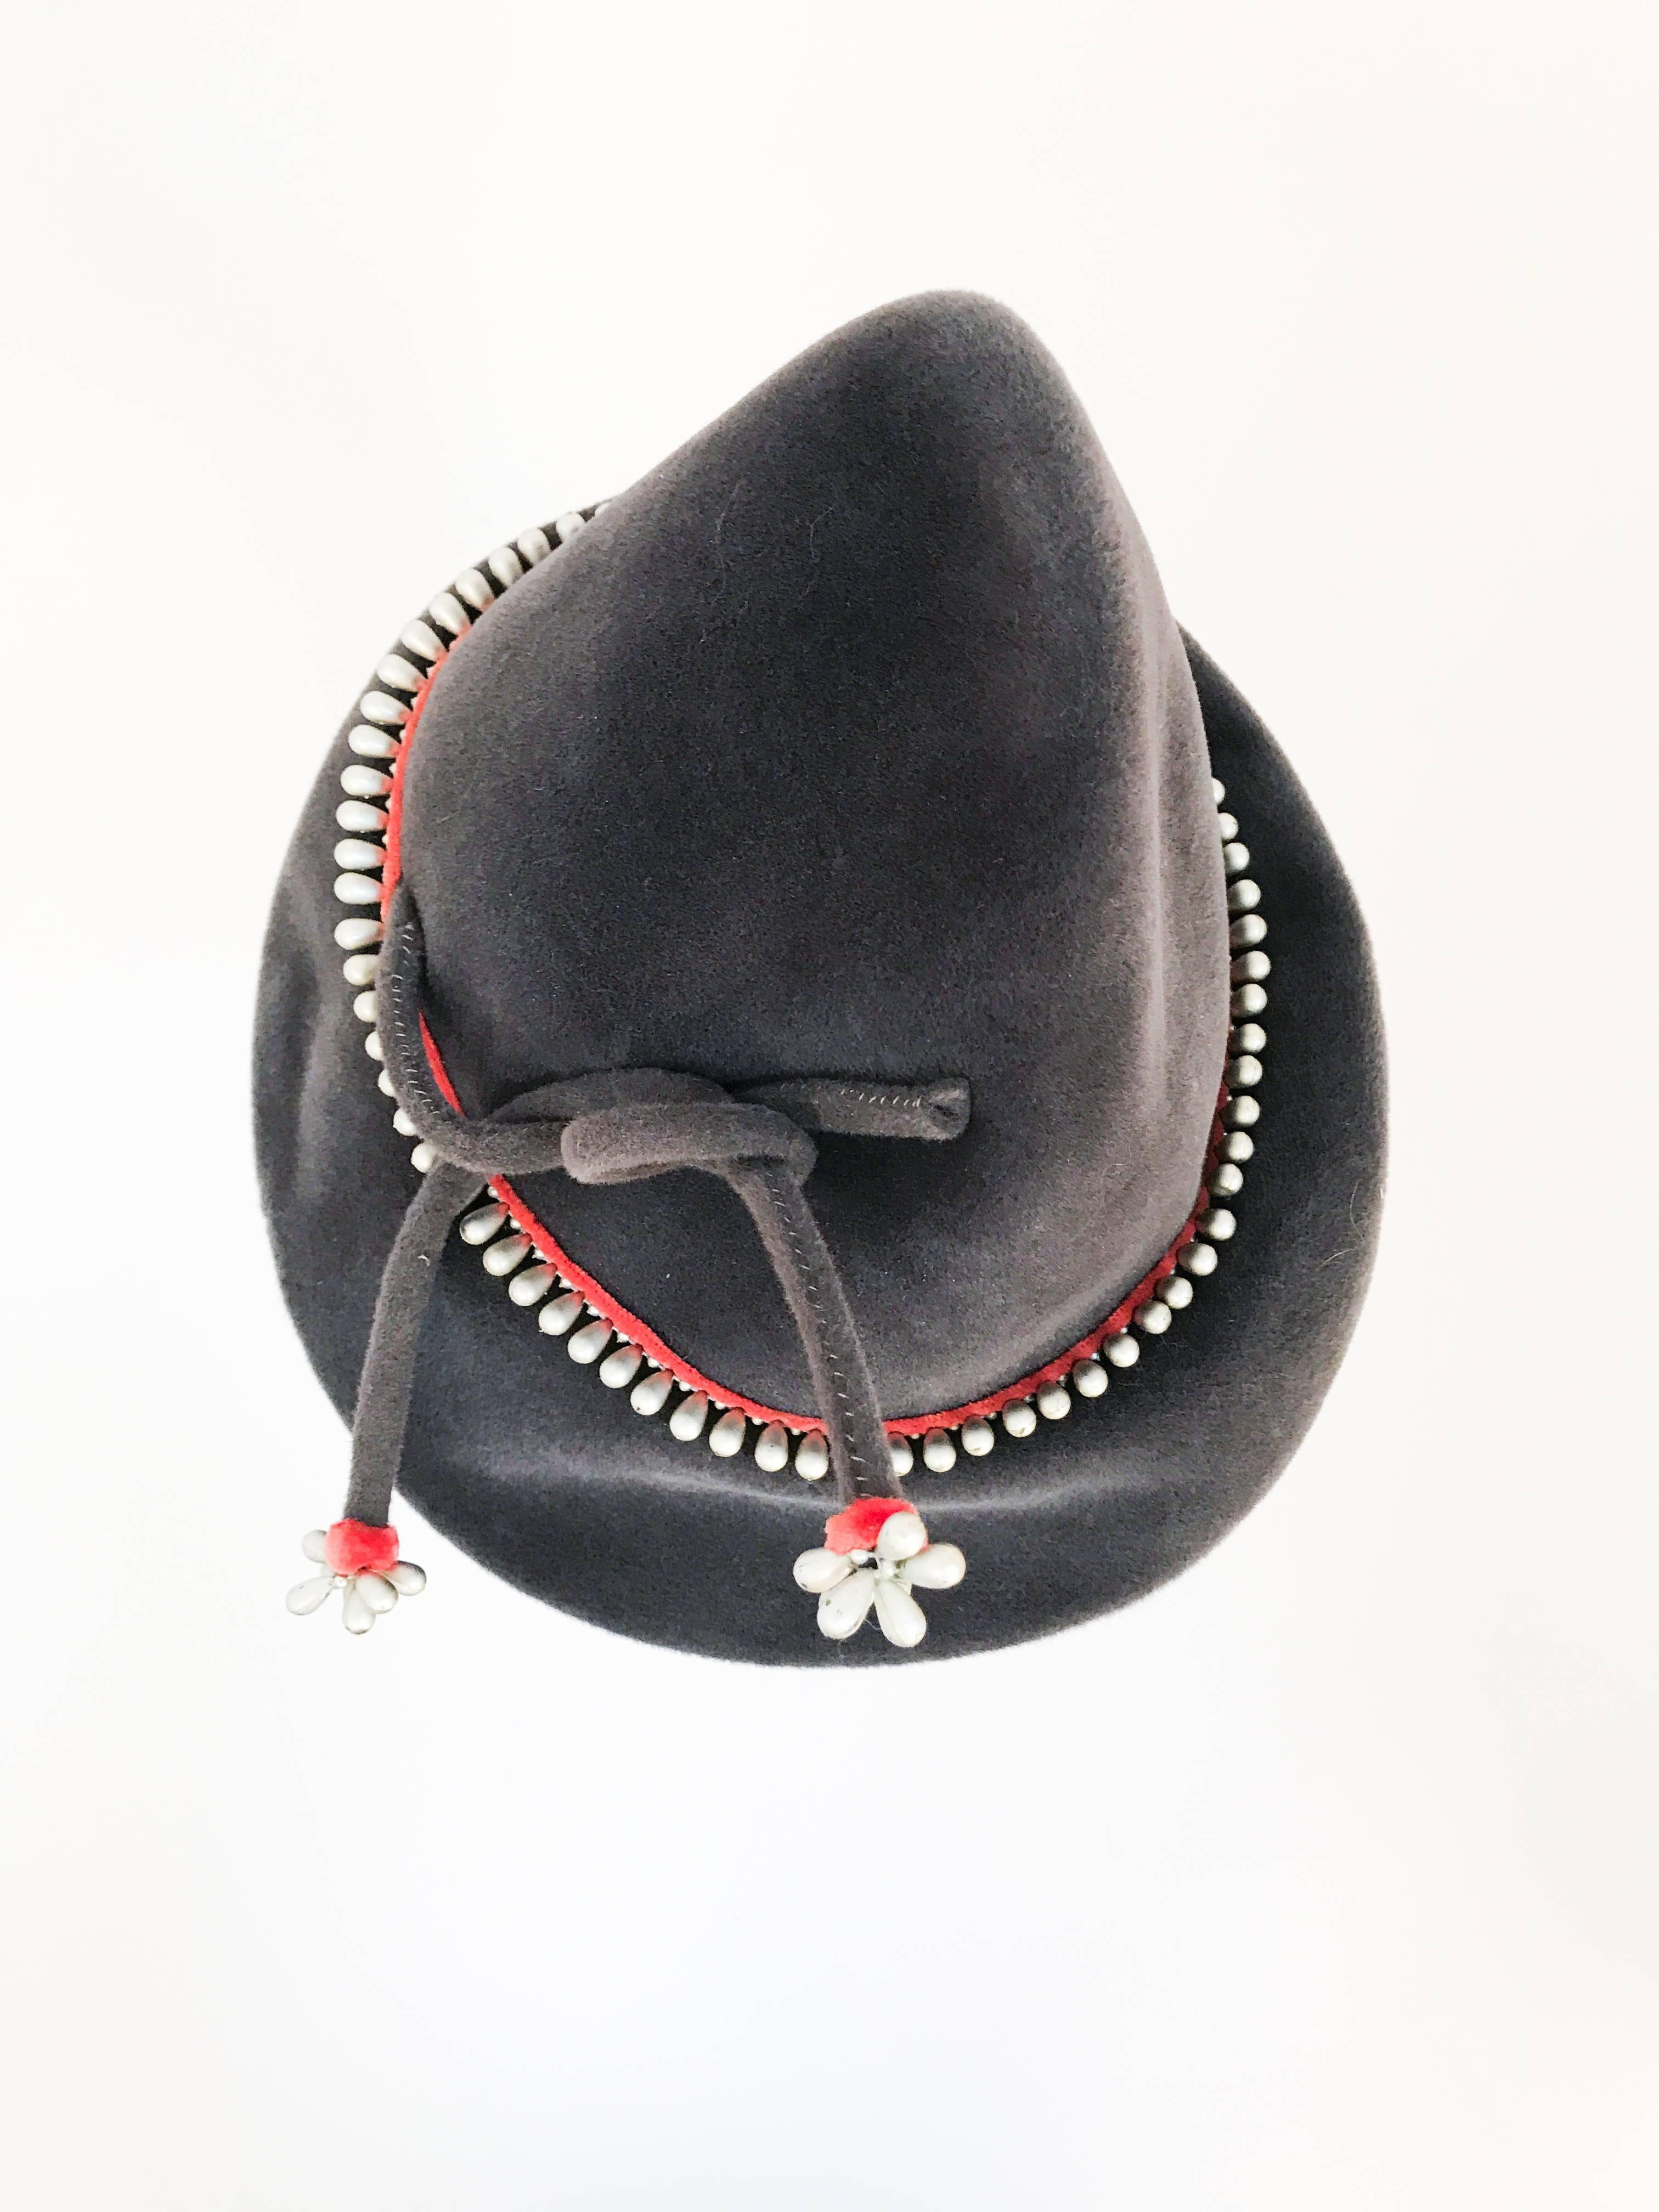 1930s Grey Wool Fur Felt Hat with Pearl and Velvet Accents 1